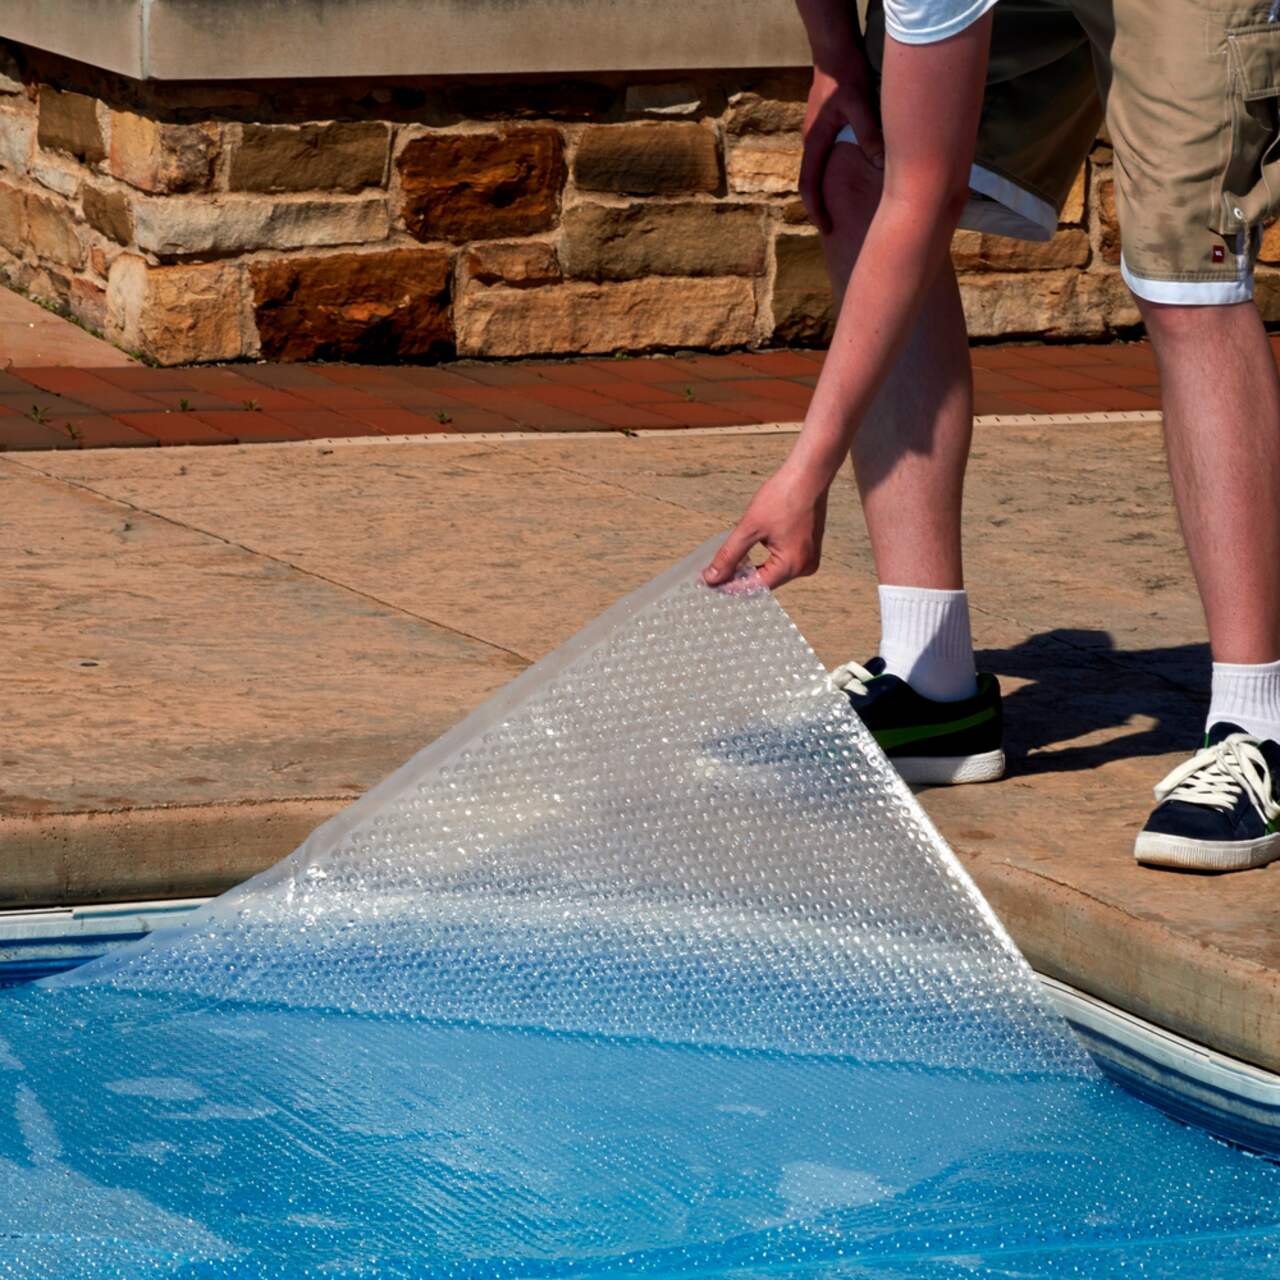 Blue Wave Round Solar Blanket for Above Ground Pool, Clear, 15-ft